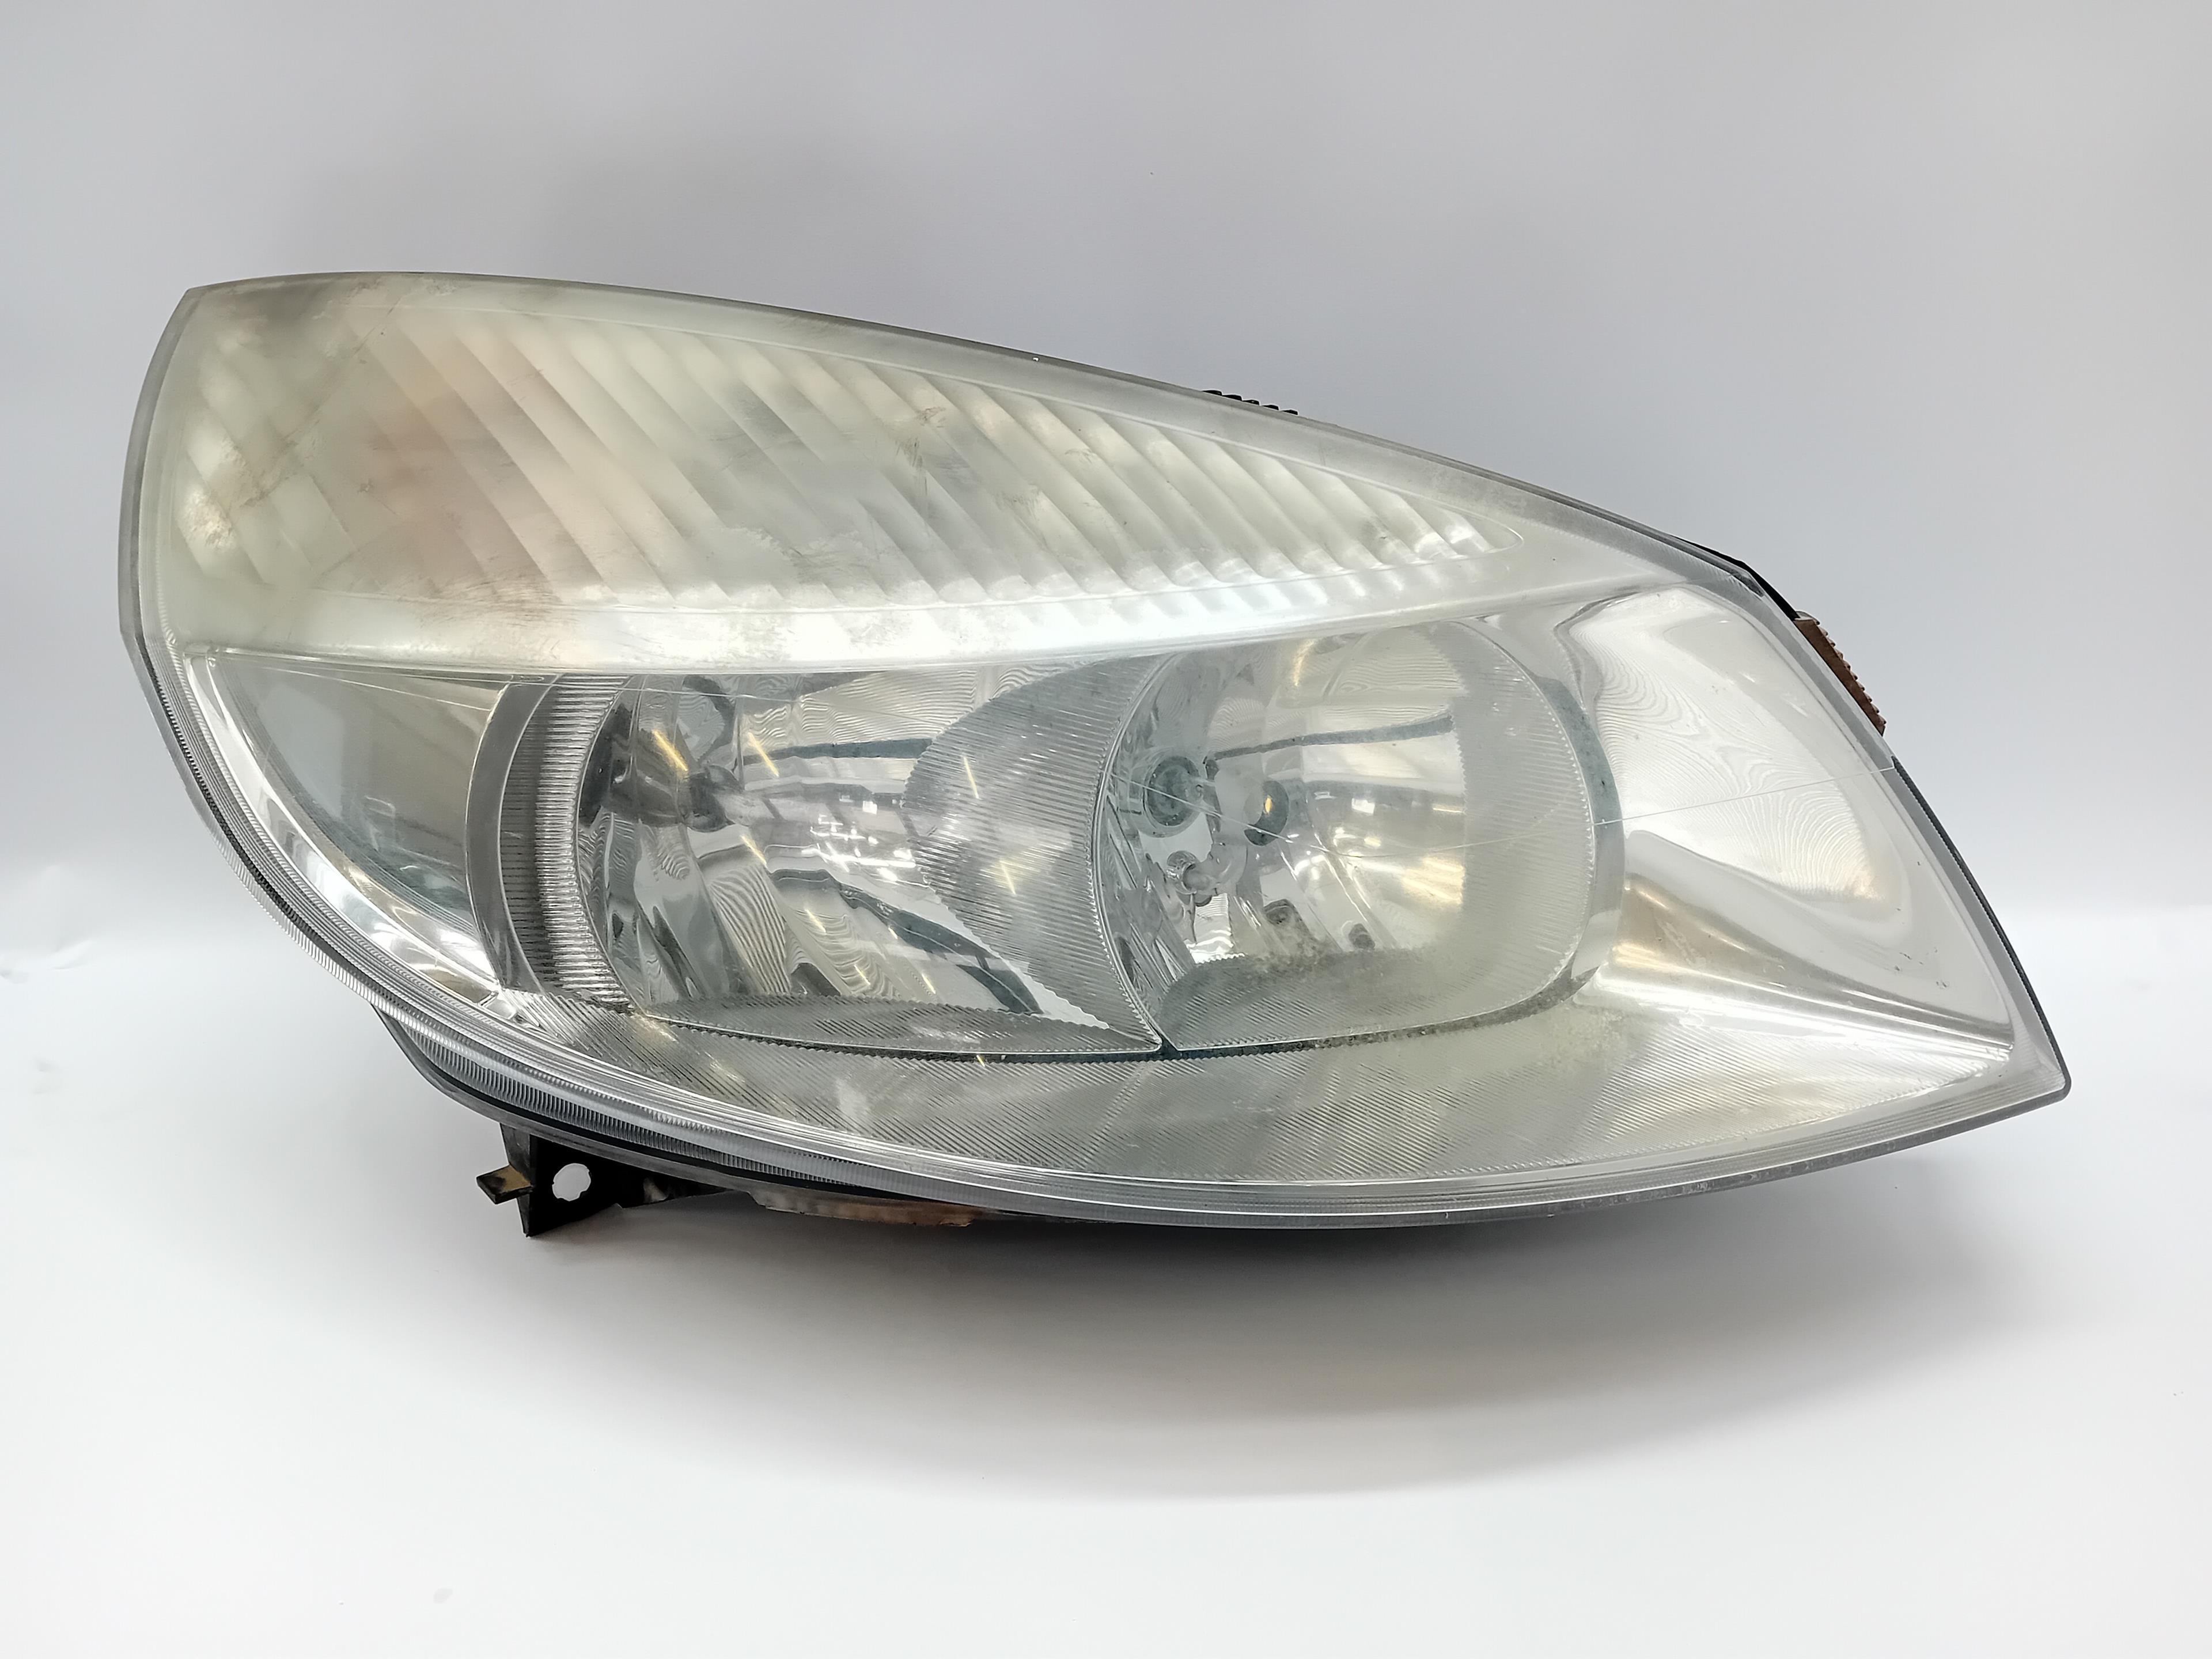 RENAULT Scenic 2 generation (2003-2010) Front Right Headlight 260102336R 25221250